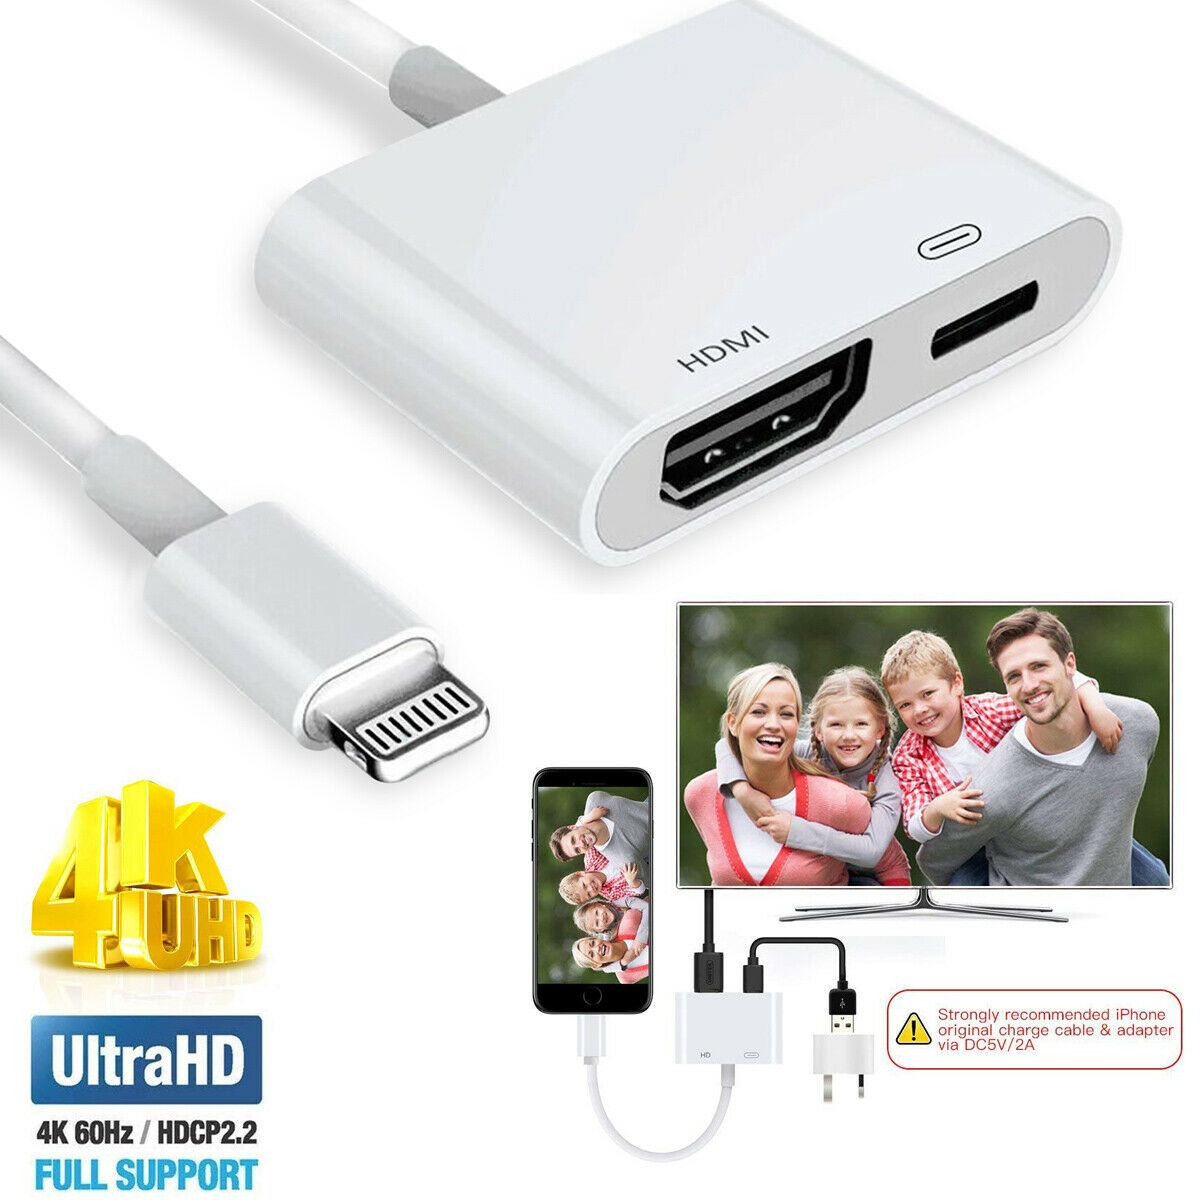 HDMI Adapter for iPhone to TV, Apple MFi Certified iPhone HDMI